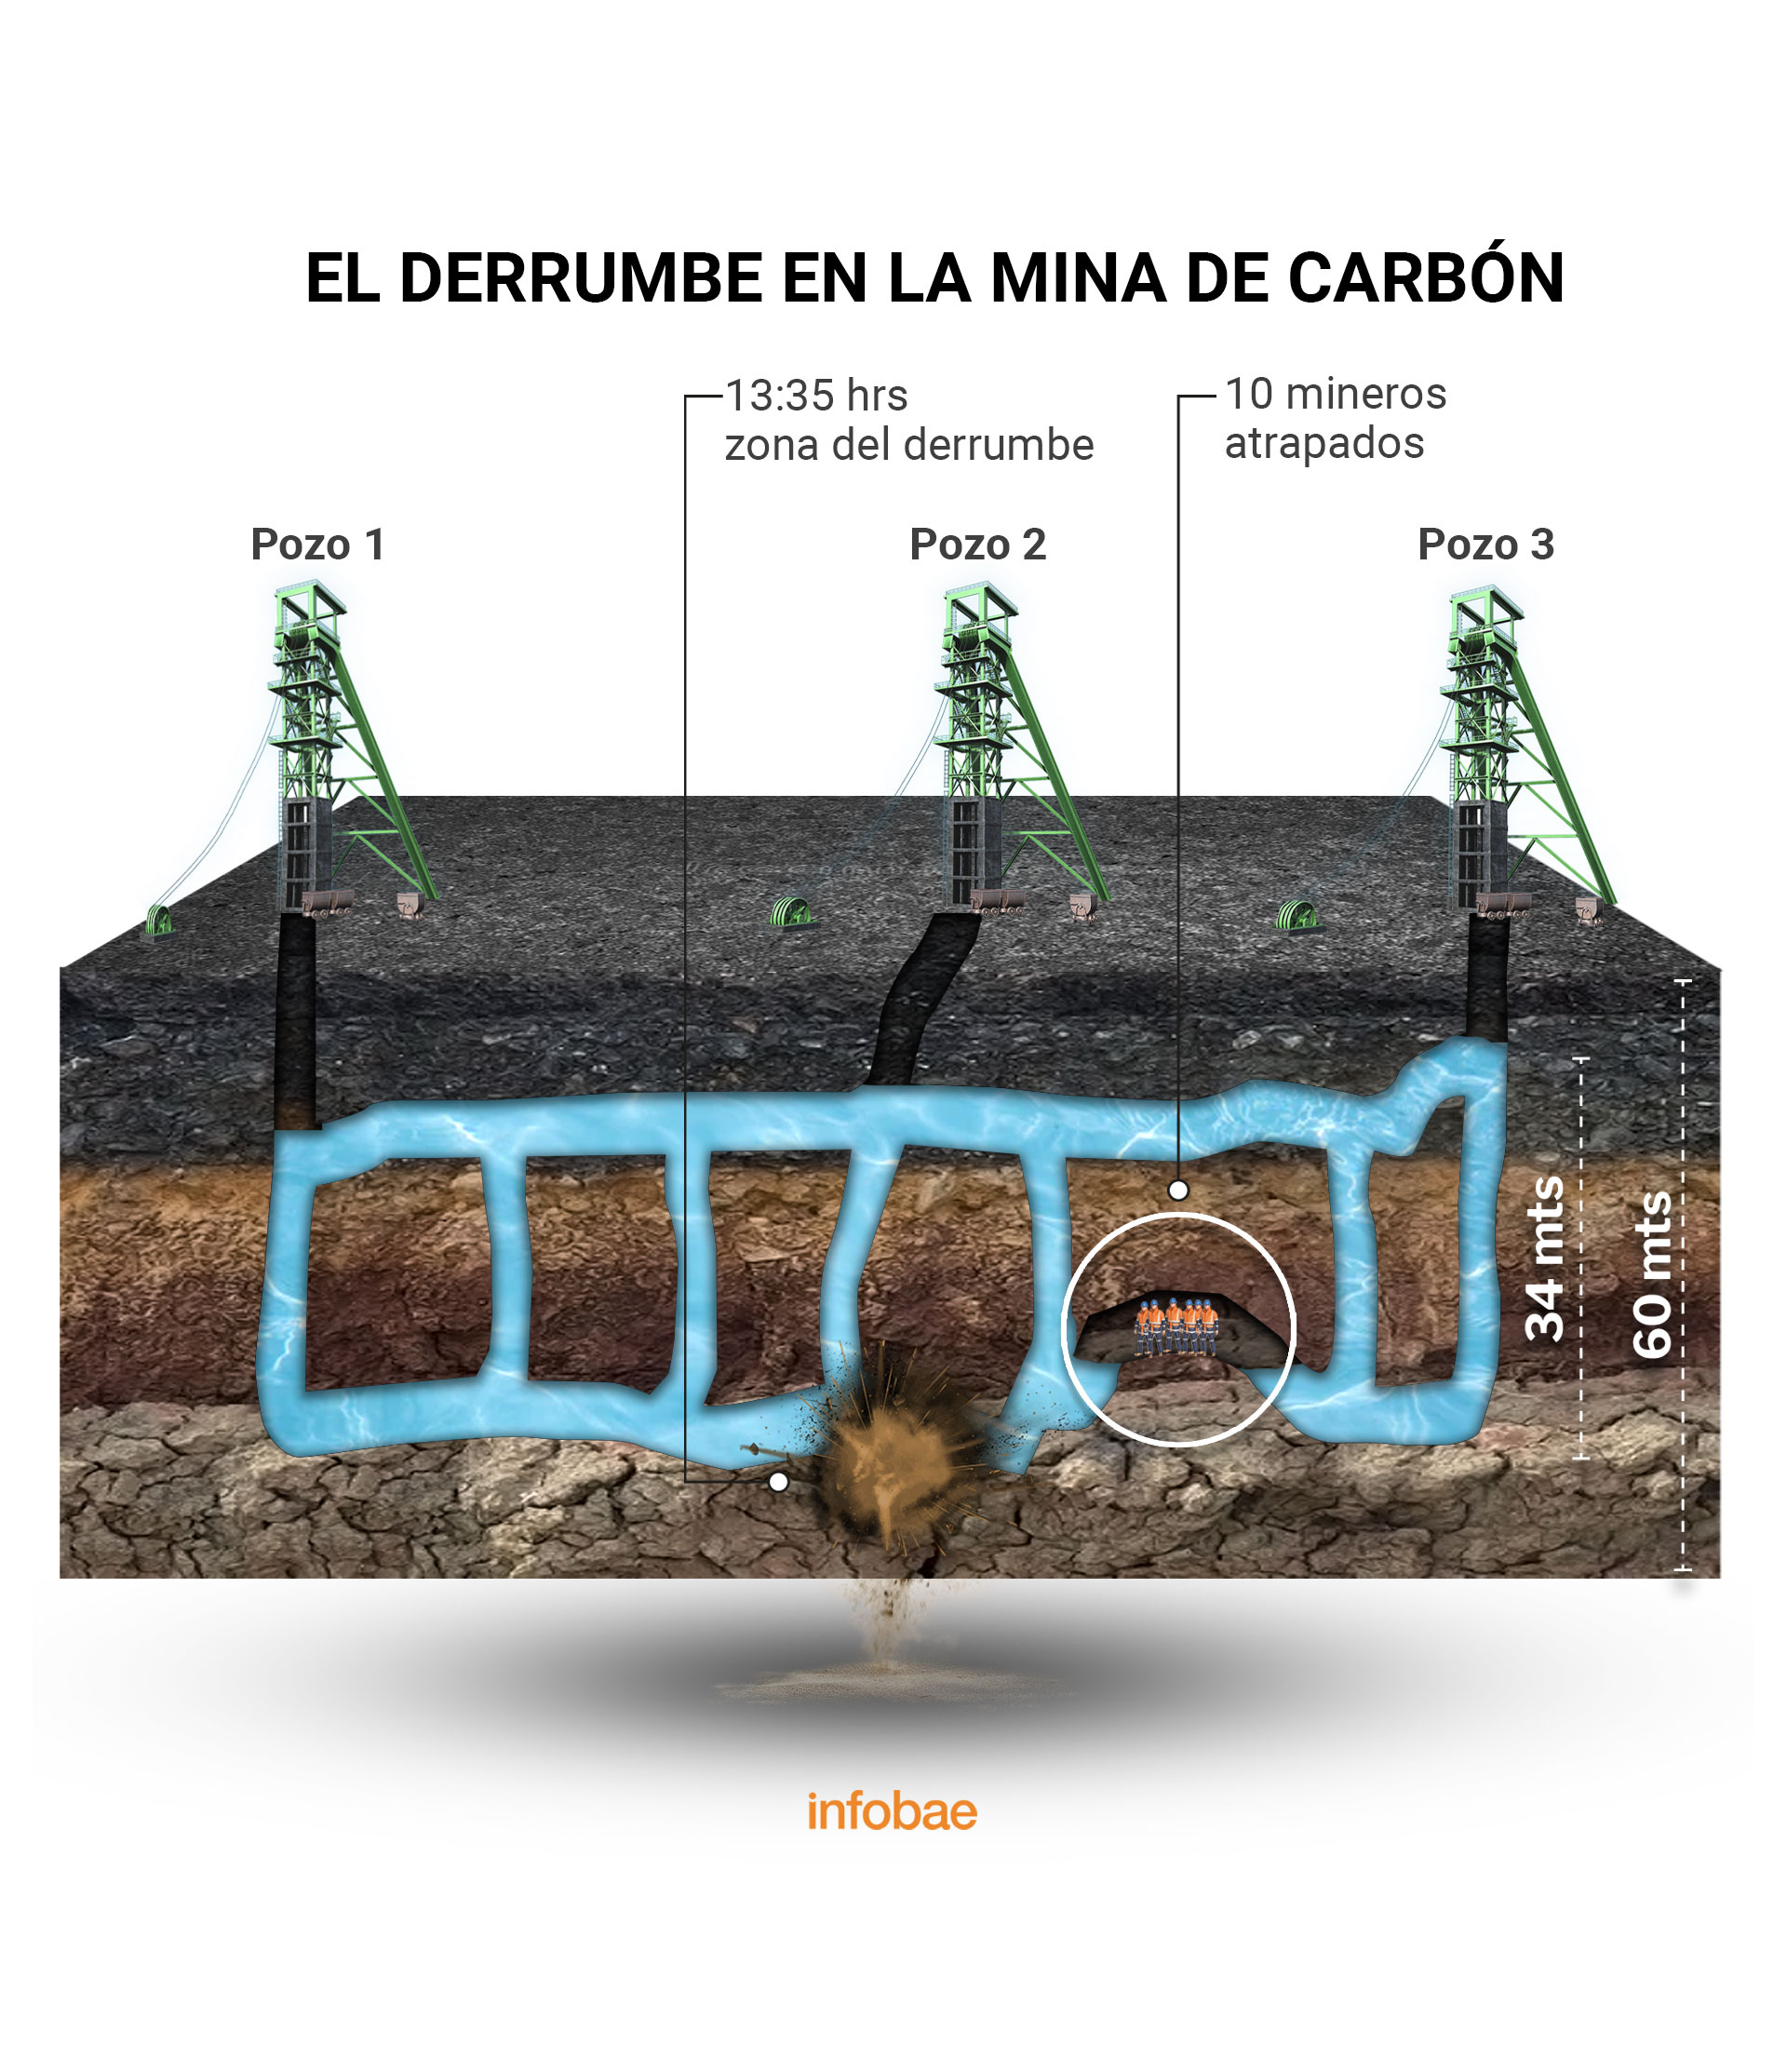 The collapse caused 10 miners to be trapped 60 meters deep, surrounded by tunnels with up to 34 meters of flooding.  (Illustration: Jovani Pérez / Infobae)